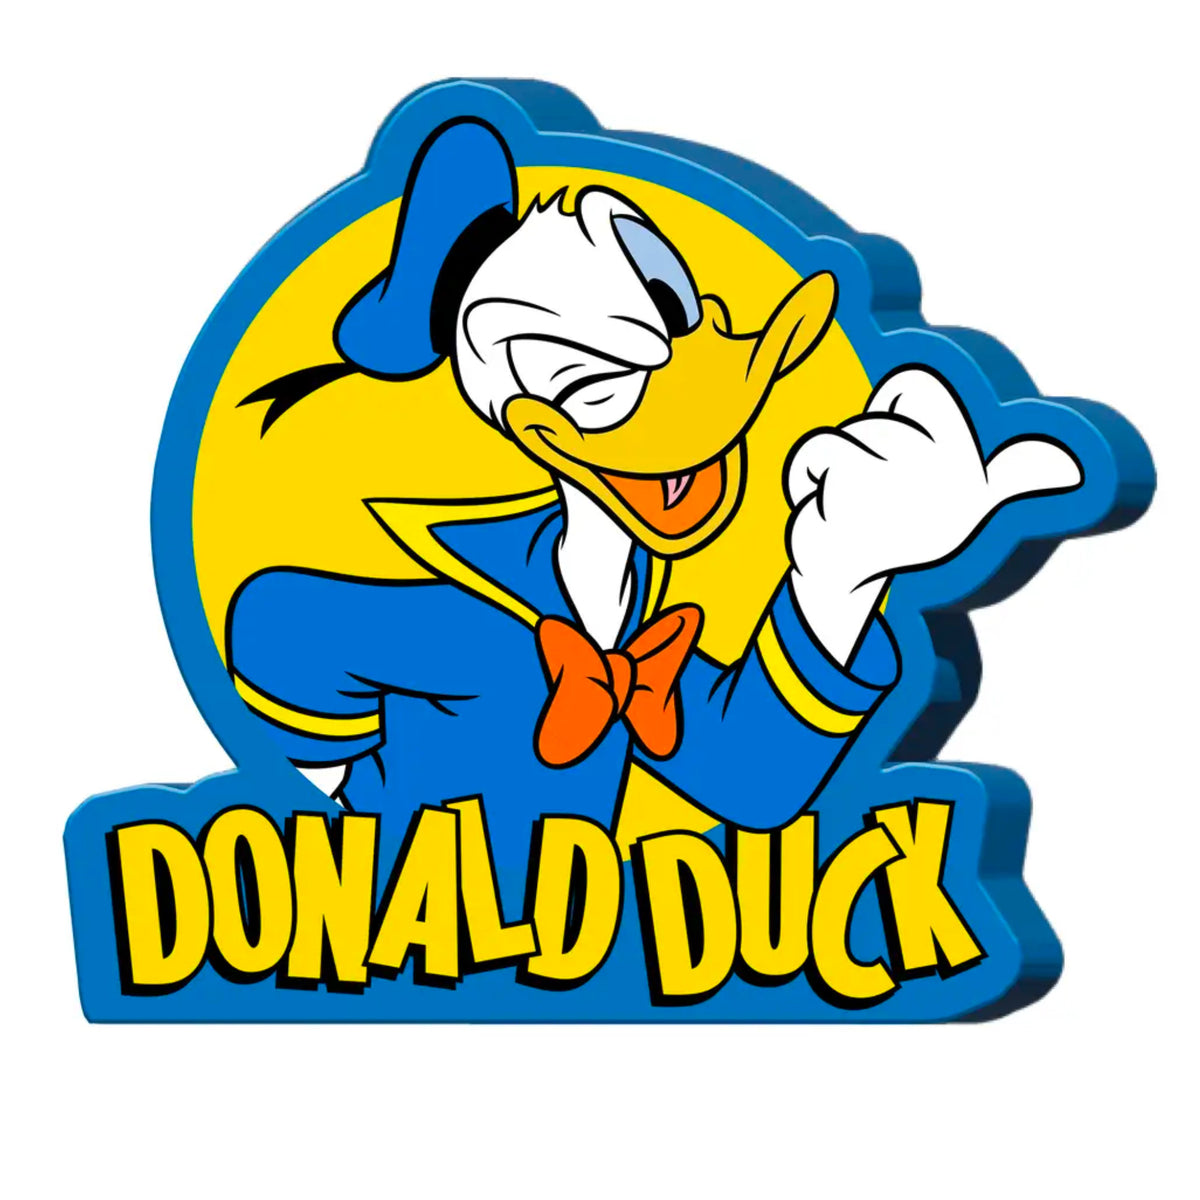 Donald Duck Wink Large Die Cut Mdf Box Wall Sign